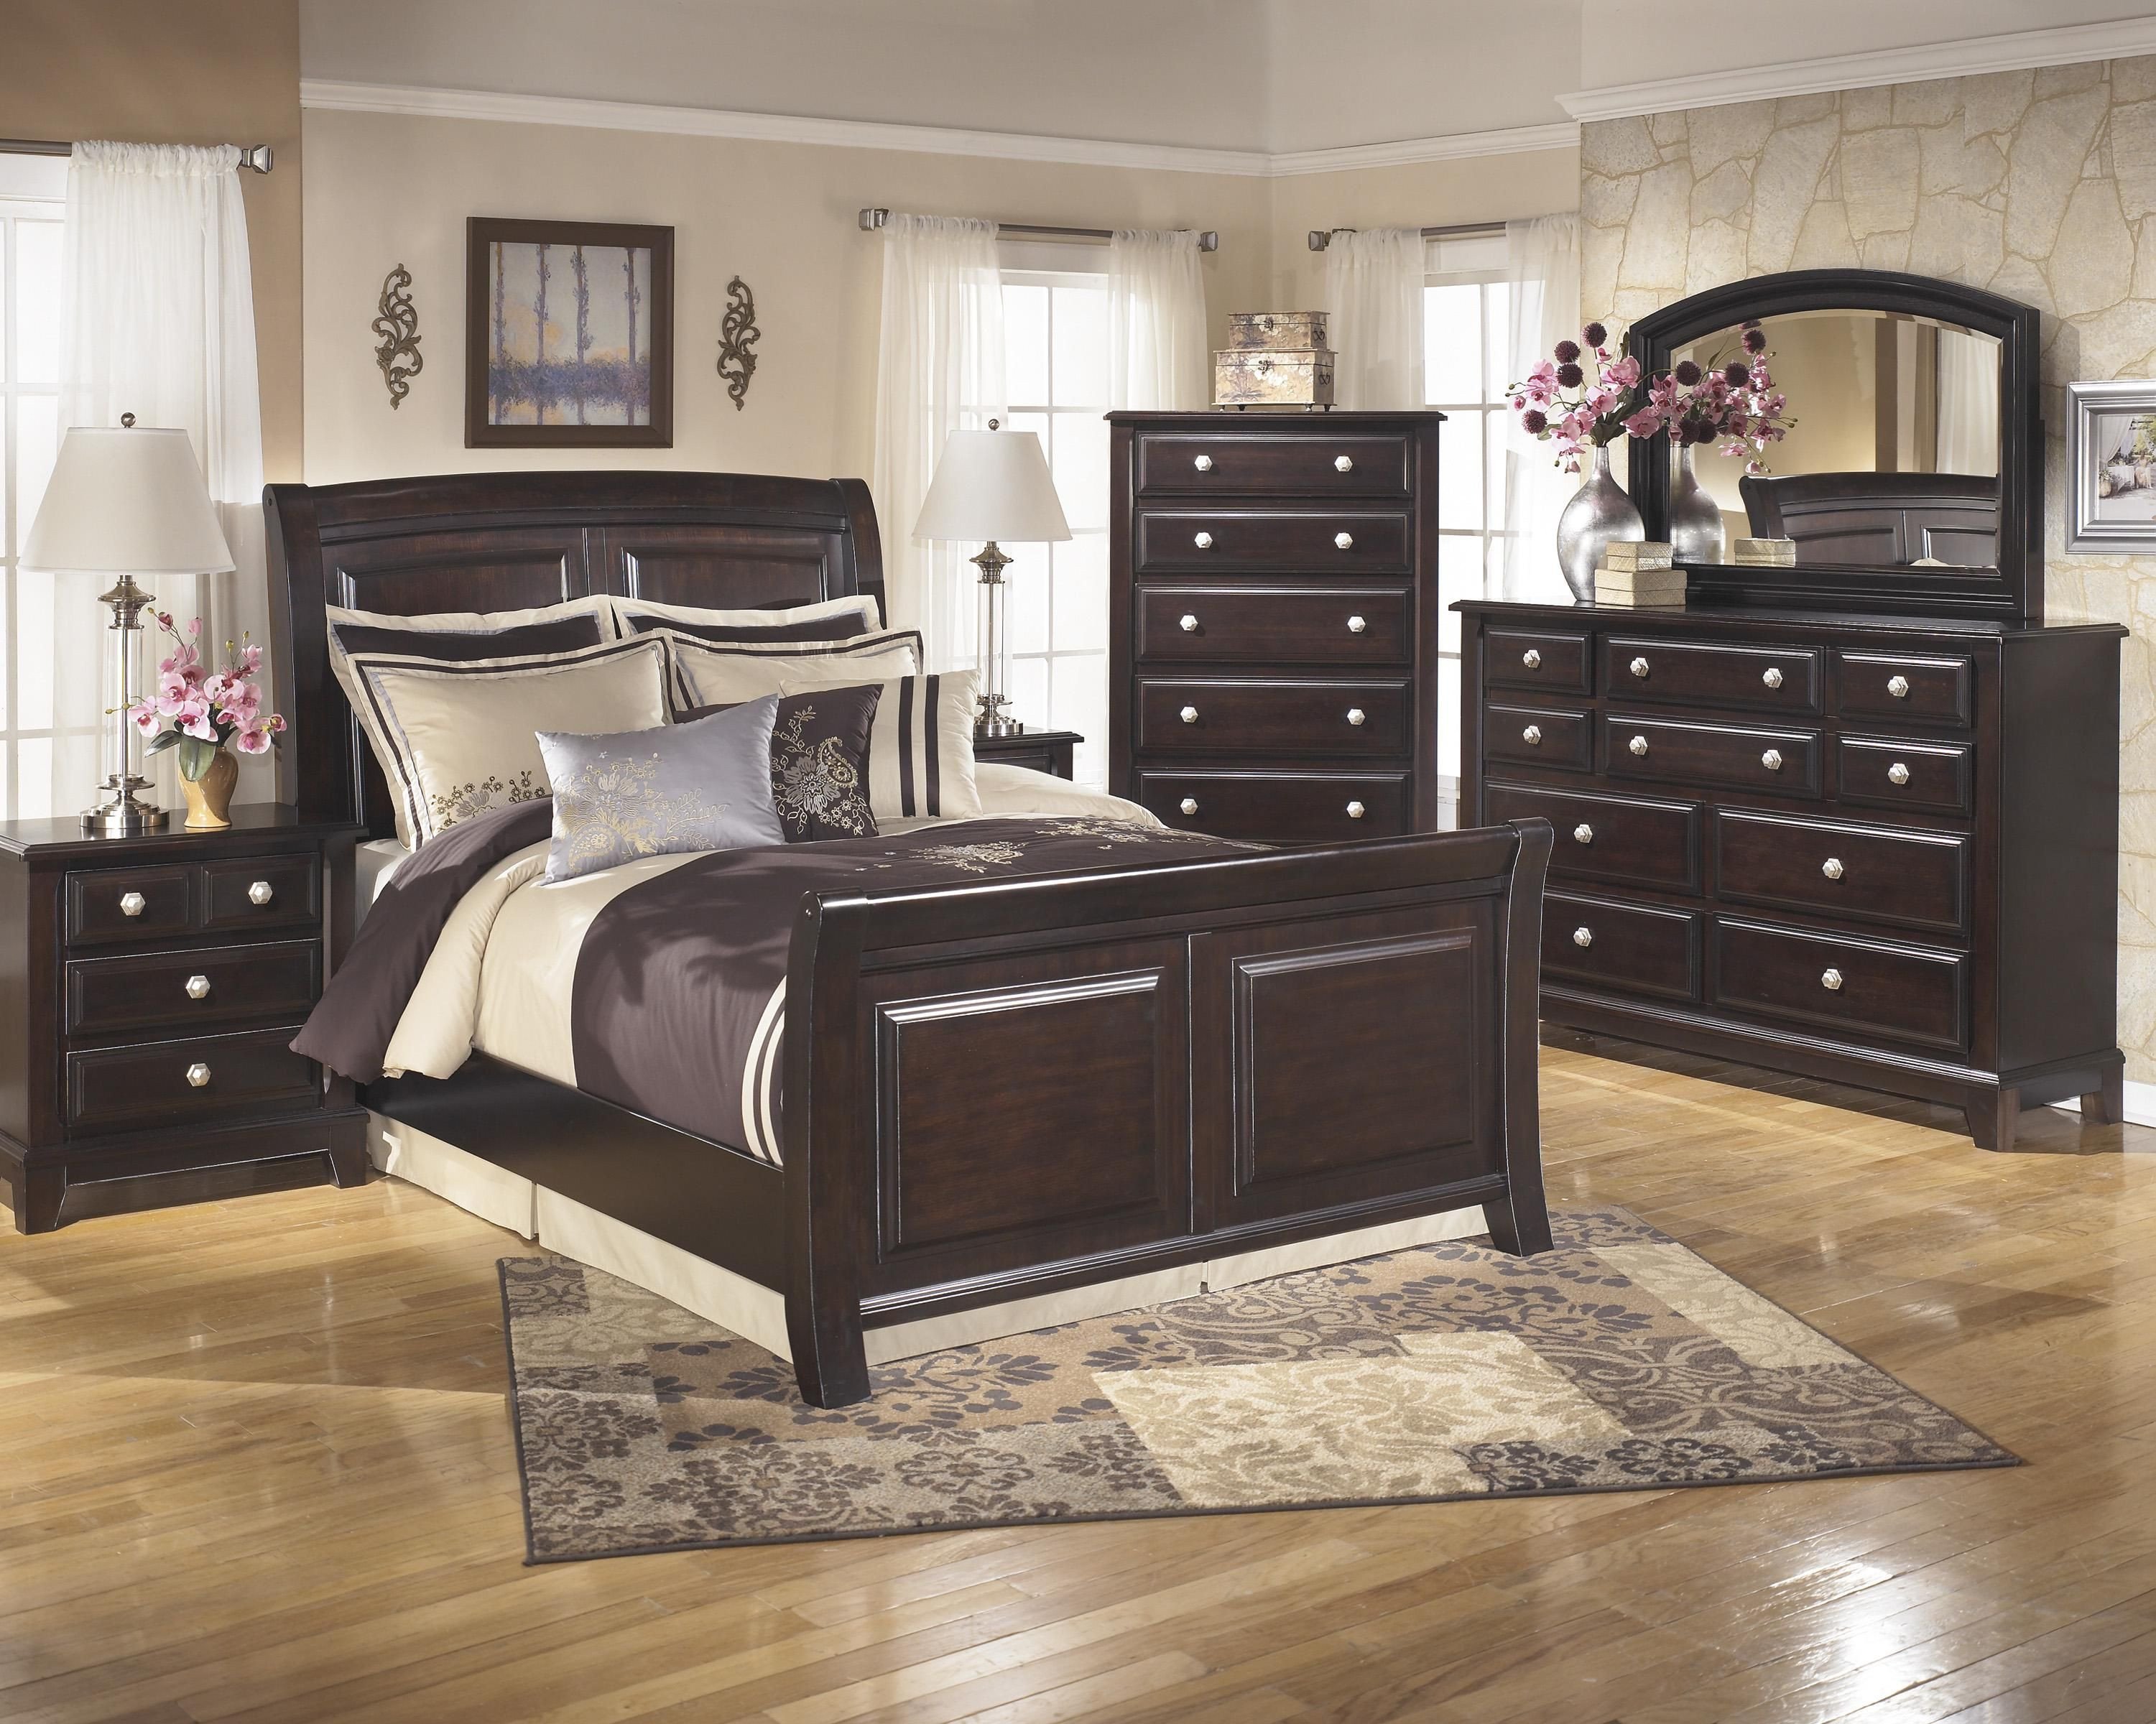 Bedroom Set with Mattress Lovely Ridgley King Bedroom Group by Signature Design by ashley